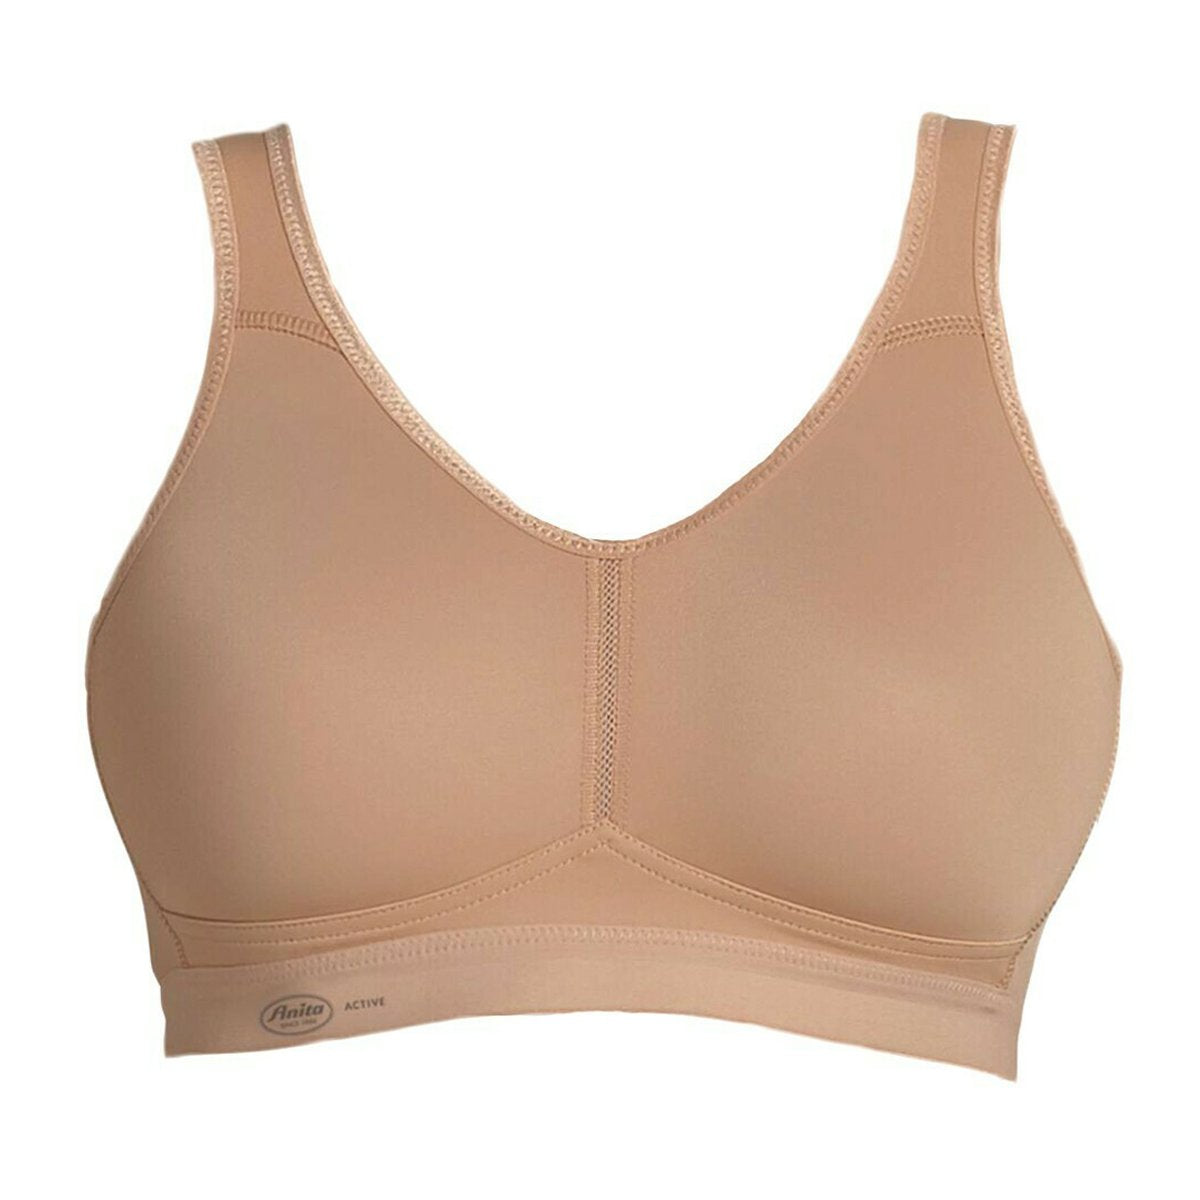 Isha Store - Isha Store presents a new range of Bras in various categories,  designs, patterns & sizes. Find the best variety of sports bra, push-up bra,  & much more lingerie at